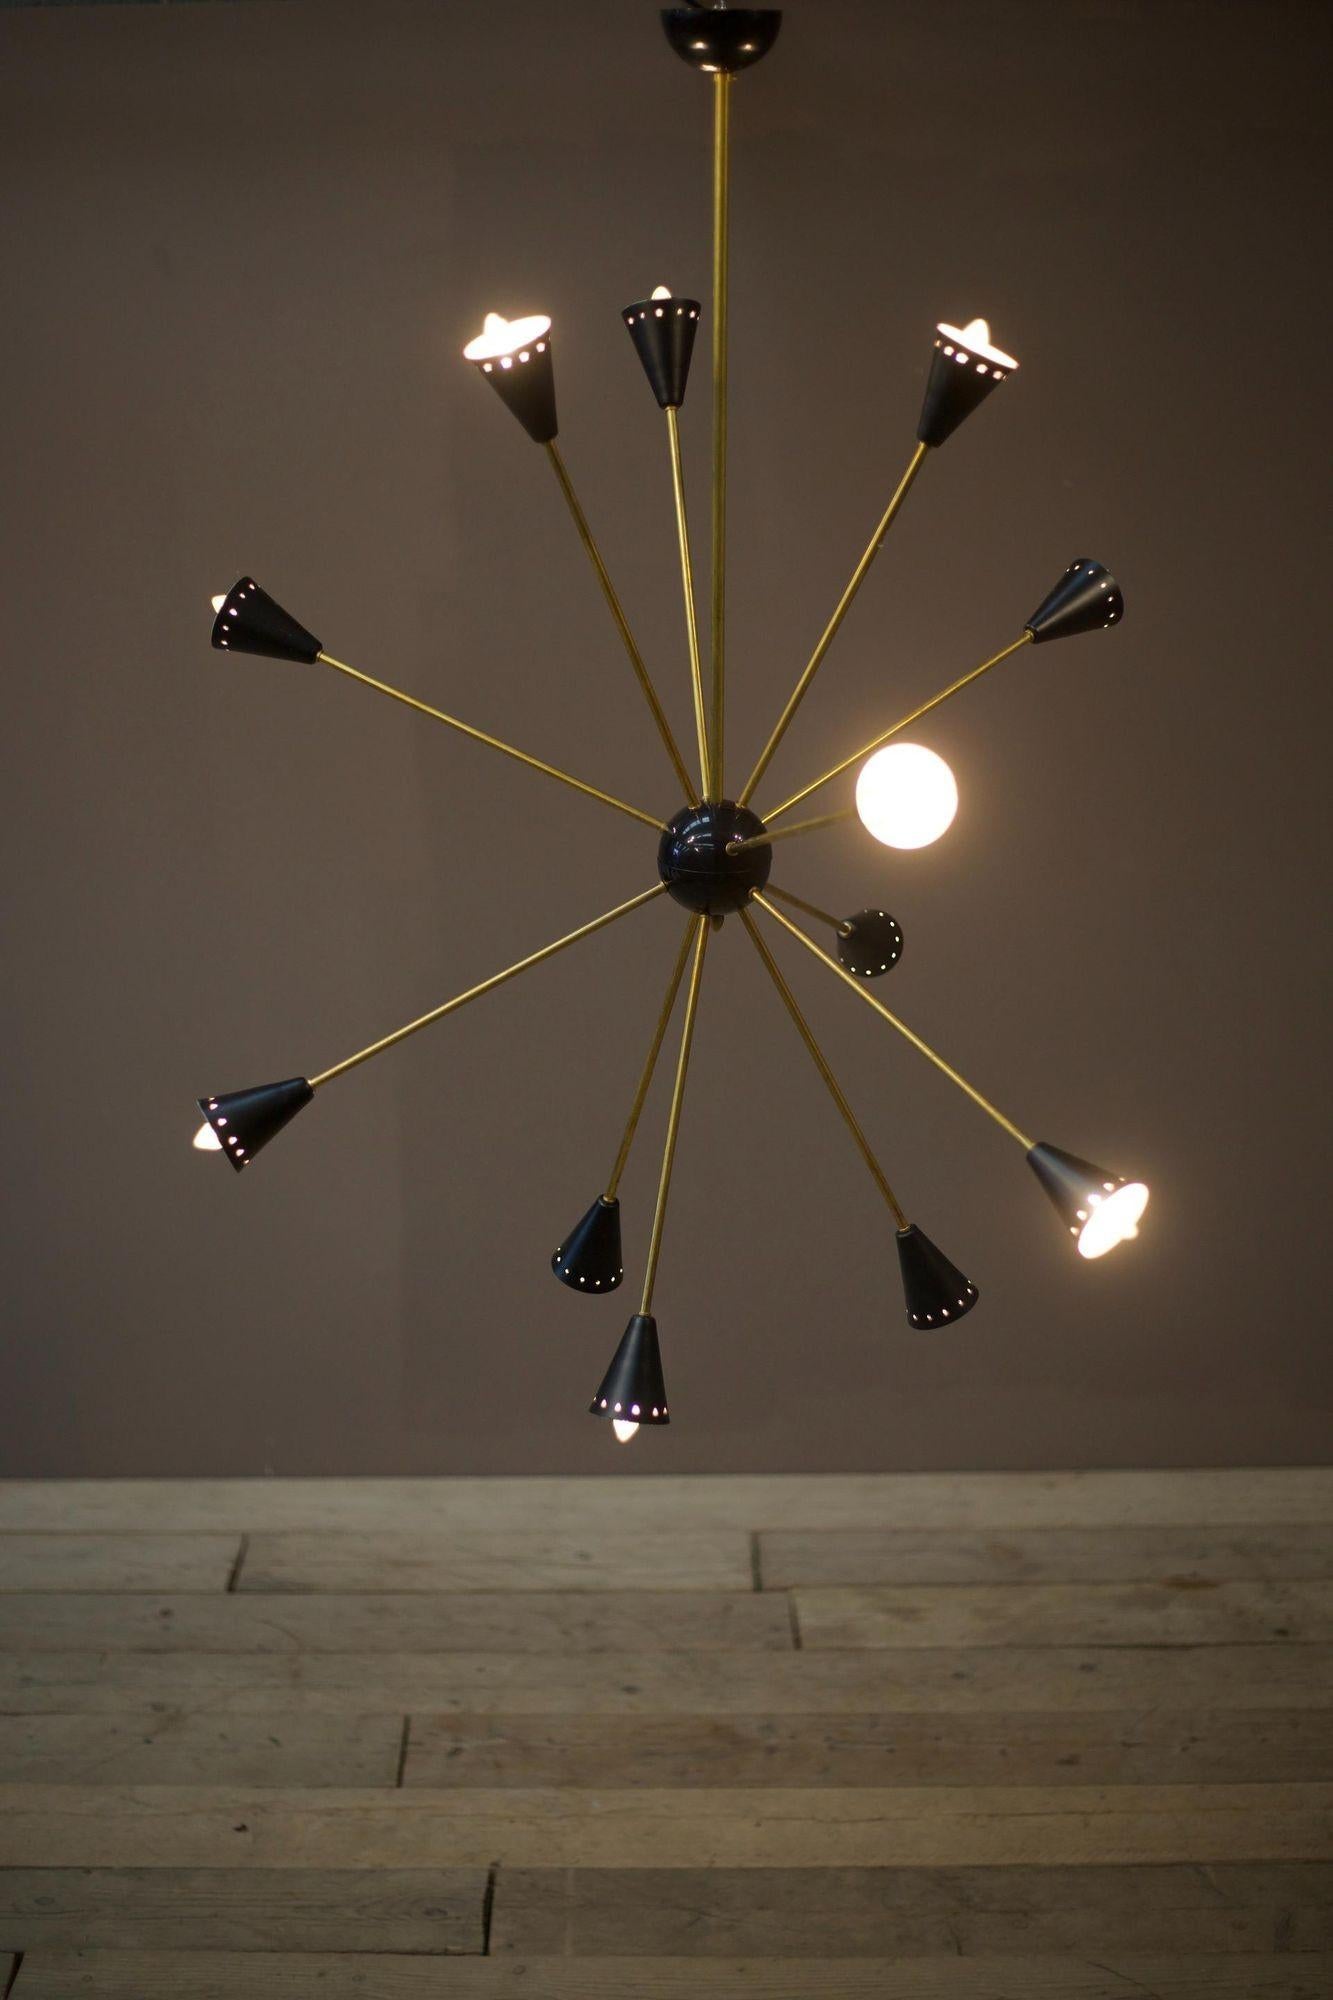 
This is a very stylish mid-century Italian ceiling light by Stilnovo. Made from brass with a black shade. The overall design is effortlessly stunning with its minimal profile and sleek nature. The multi arm design makes it a real statement in an